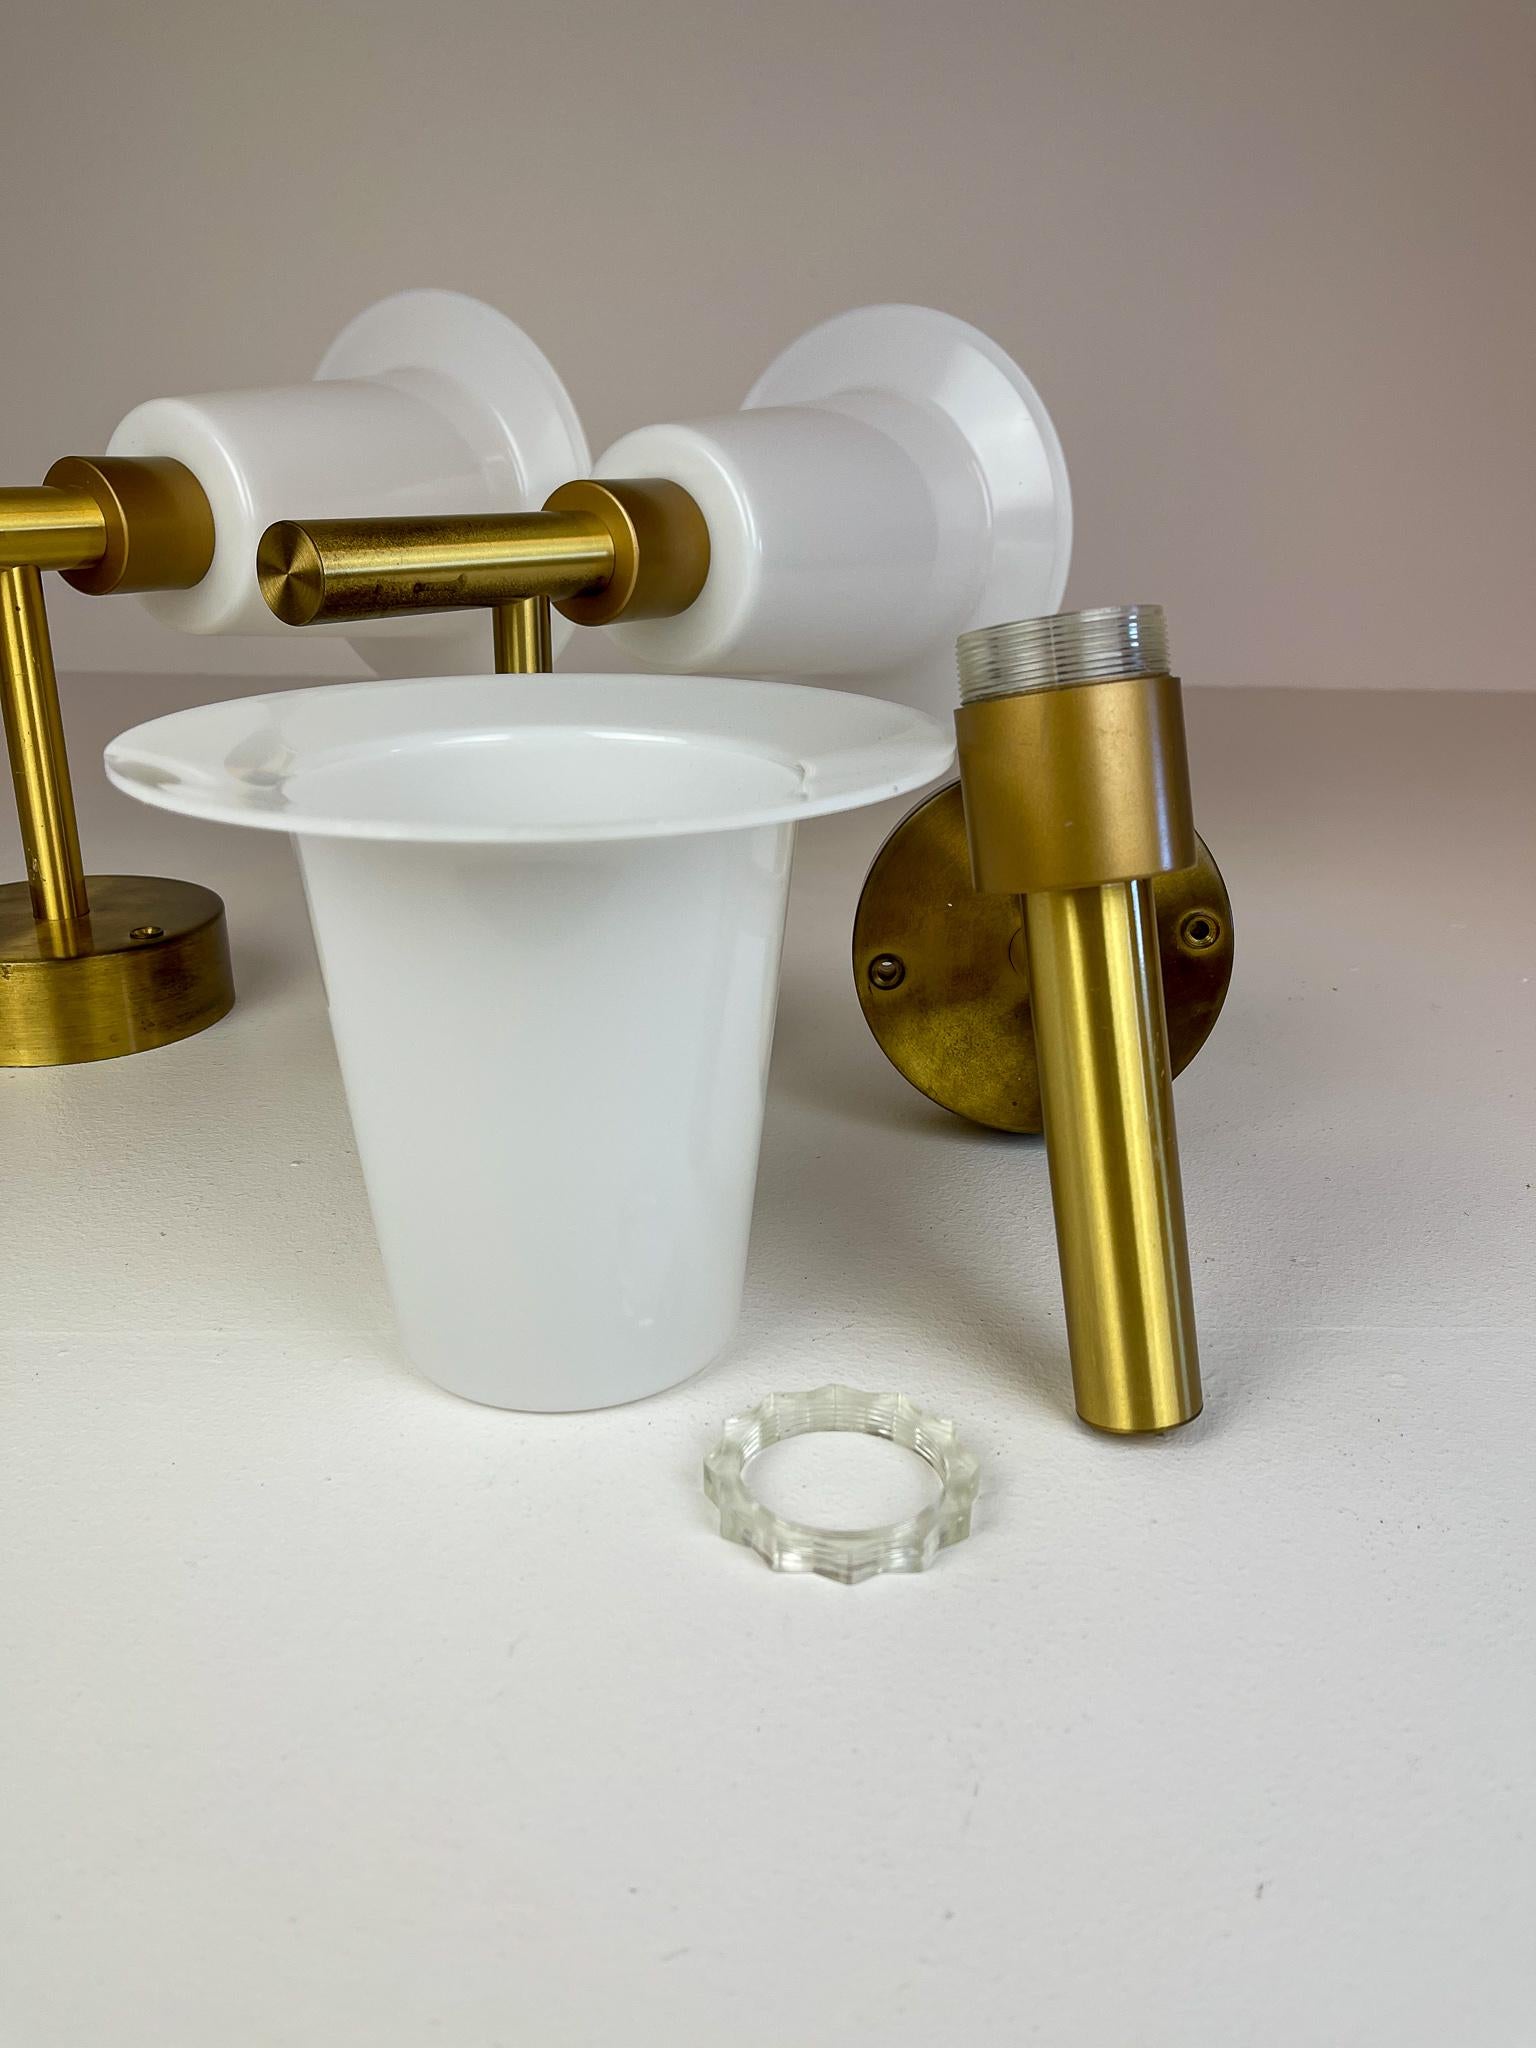 Midcentury Wall-Mounted Brass and Acrylic Lamps Luxus, Sweden, 1960s For Sale 6